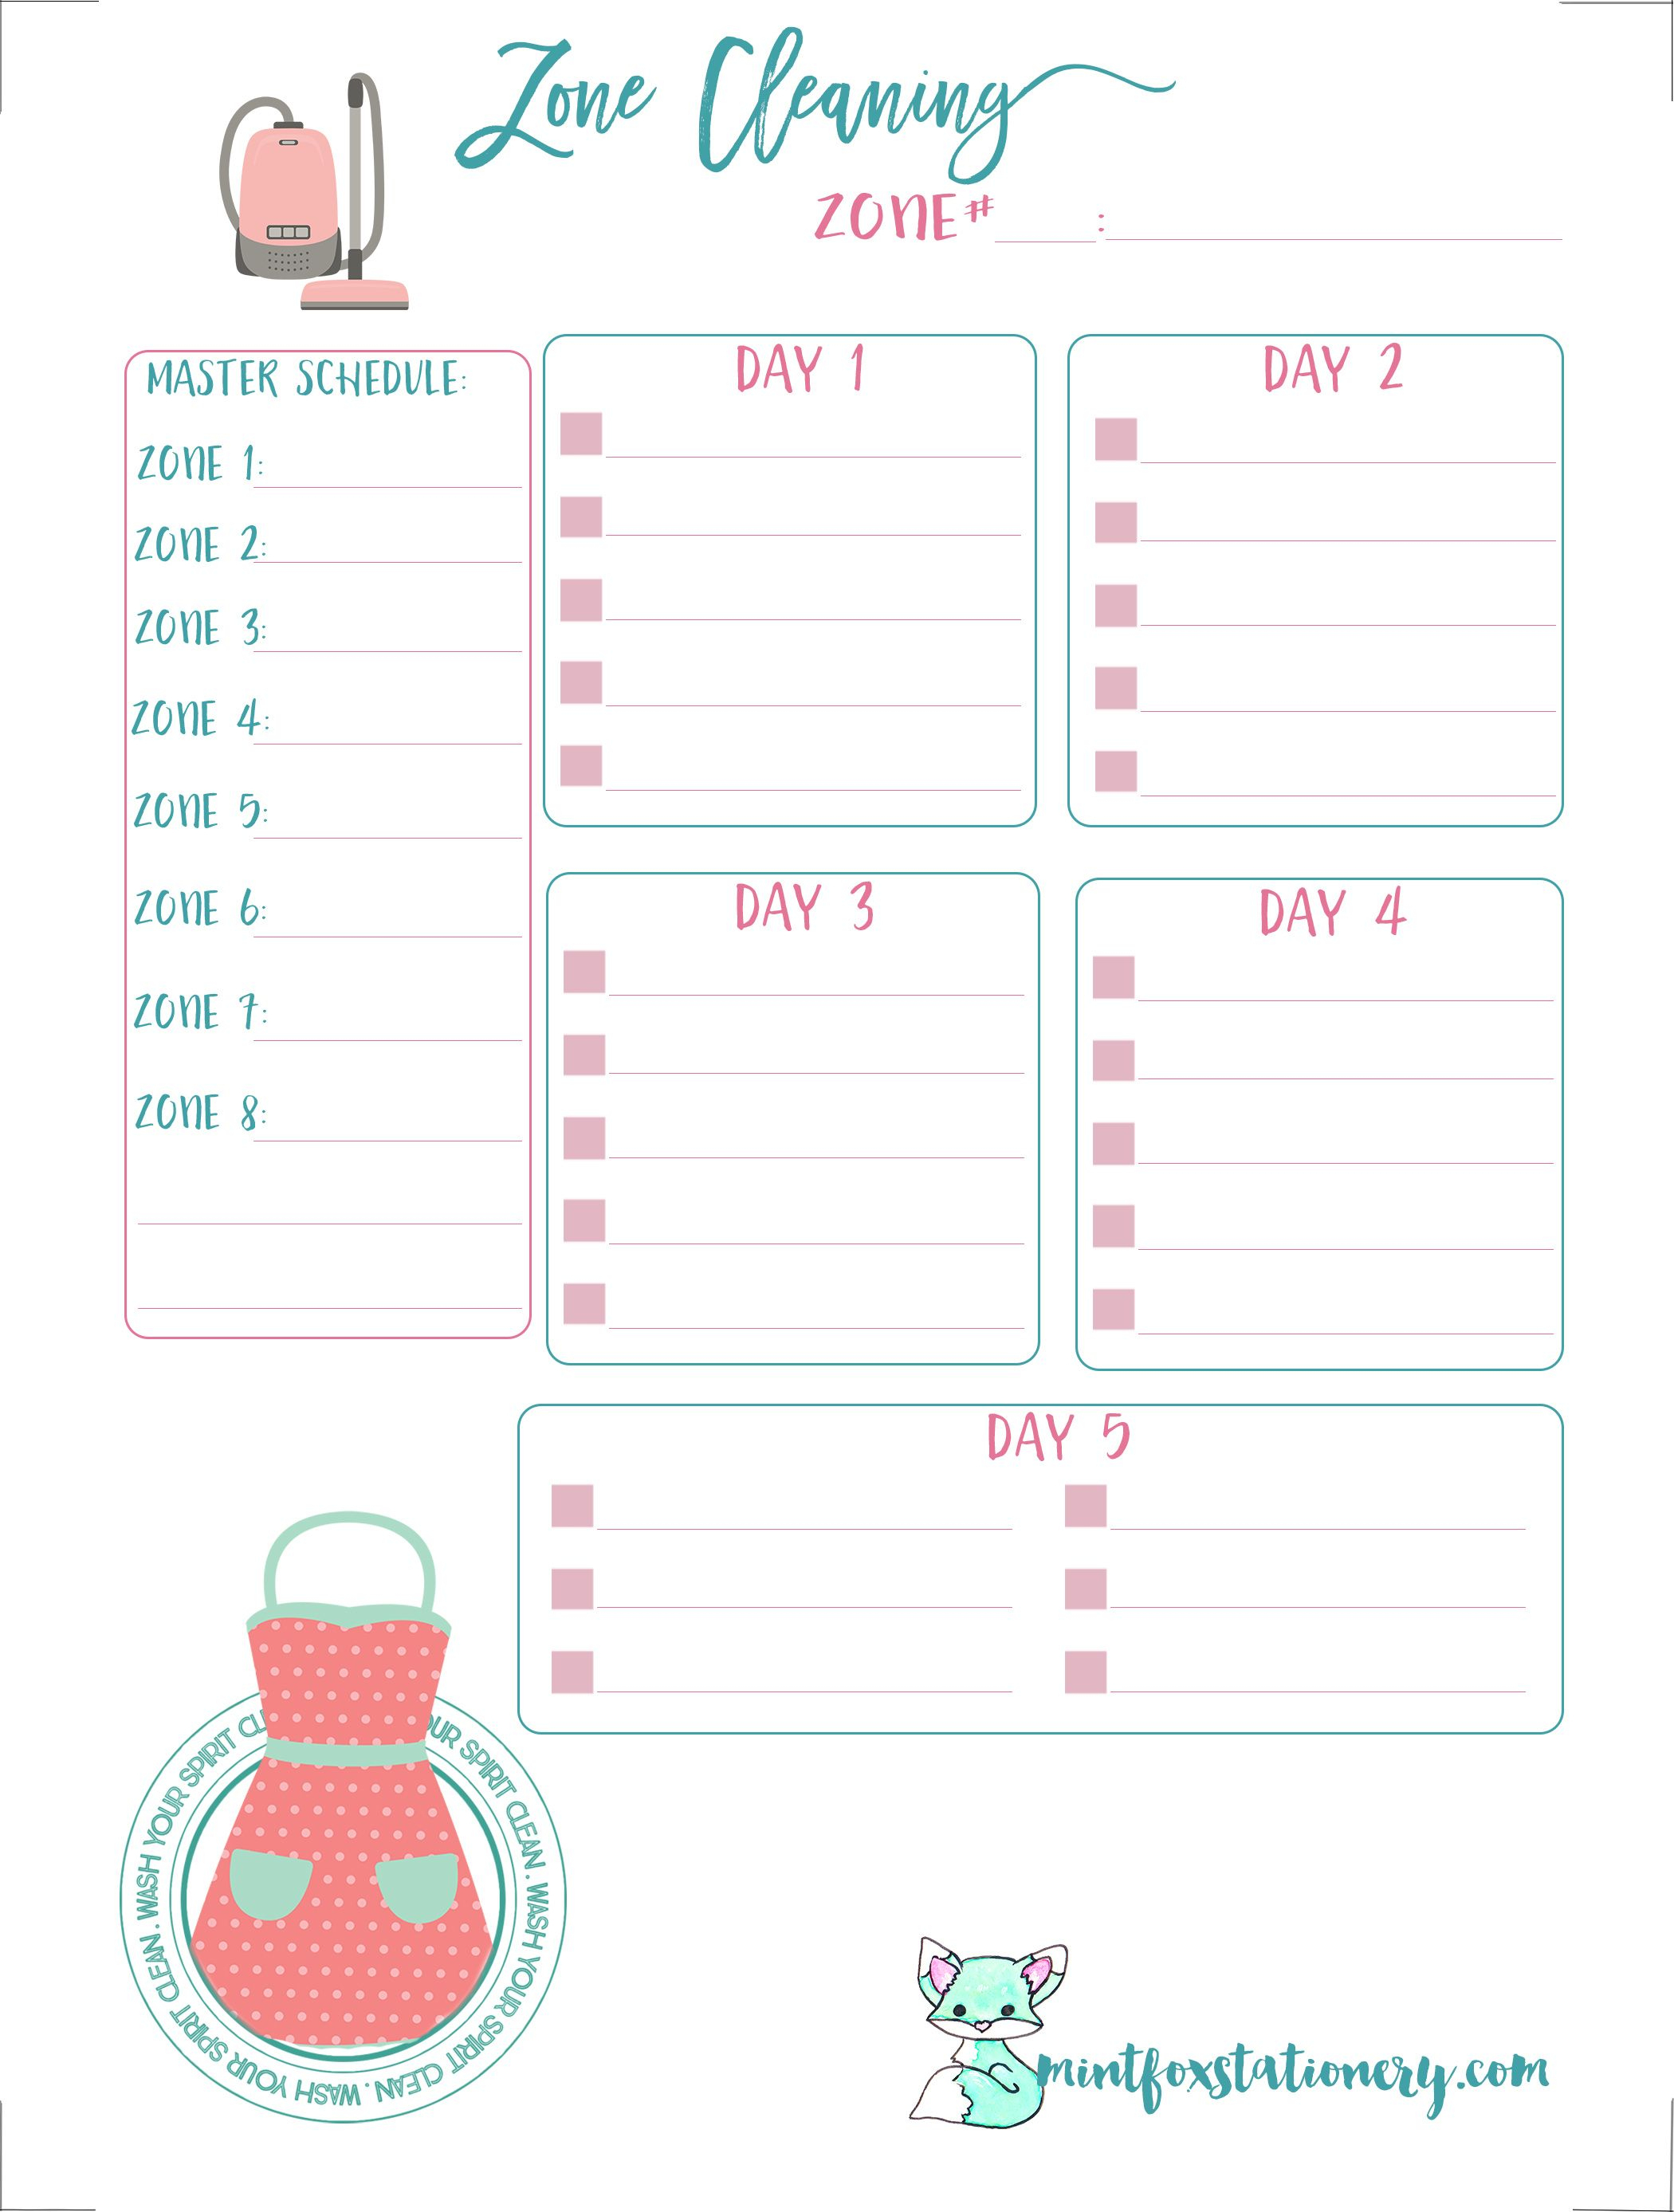 Free Printable Happy Planner Zone Cleaning Insert From Mintfox - Free Planner Refills Printable